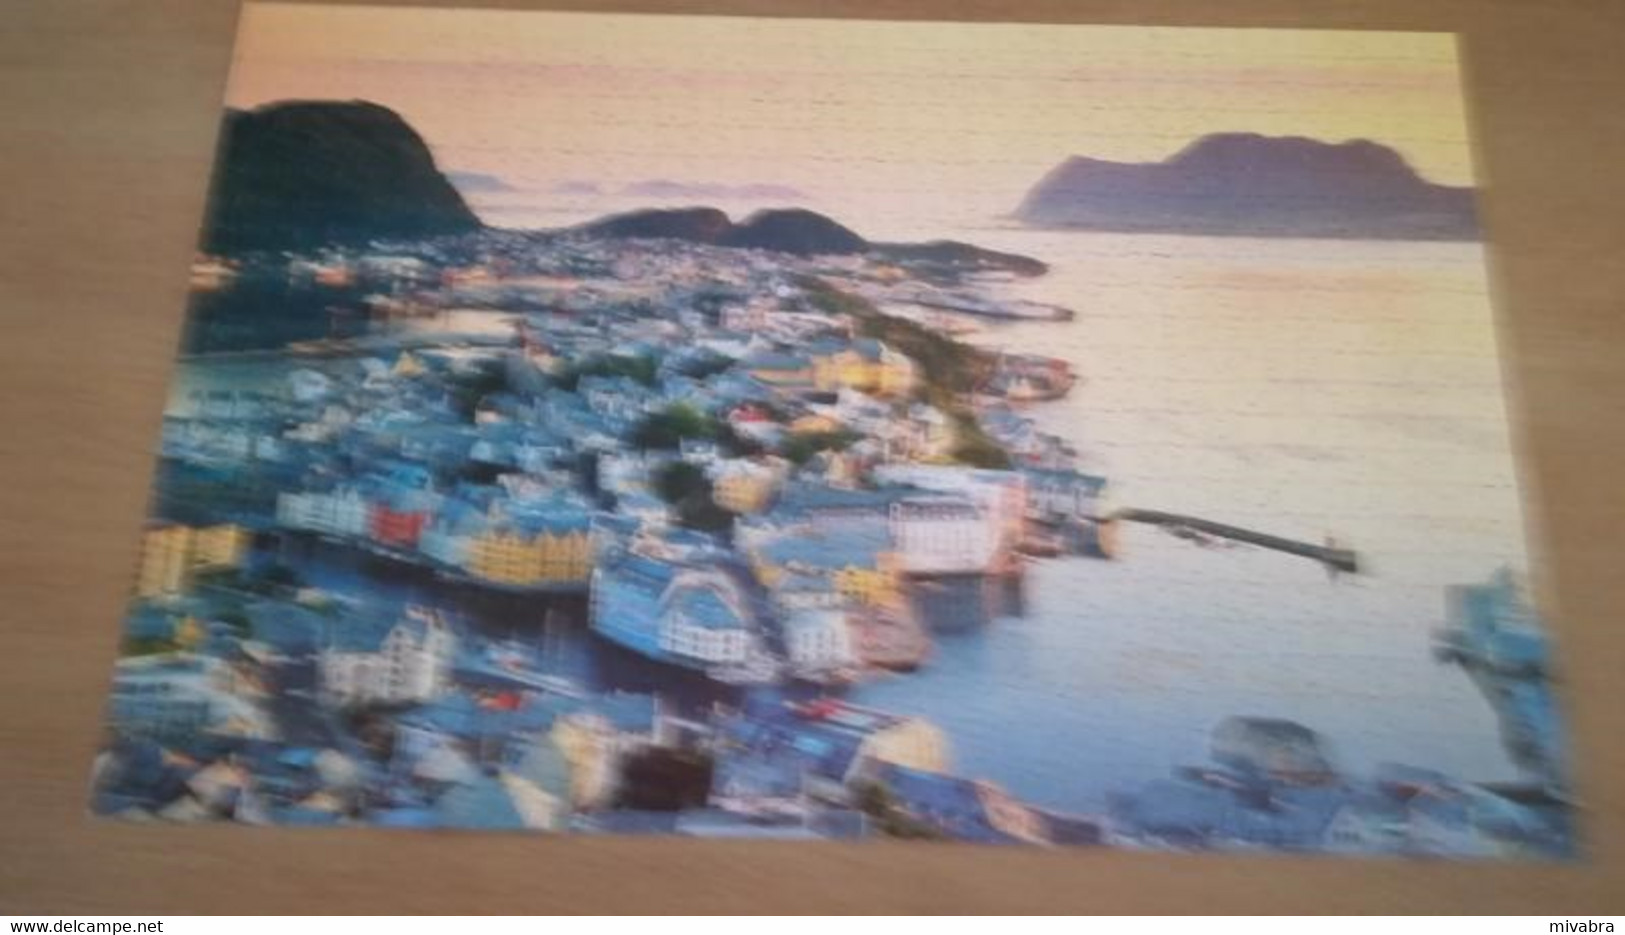 ALESUND NORWAY FISHING TOWN AT DAWN - PLAY TIME JIGSAW Puzzle 1000 Stukjes - Puzzles